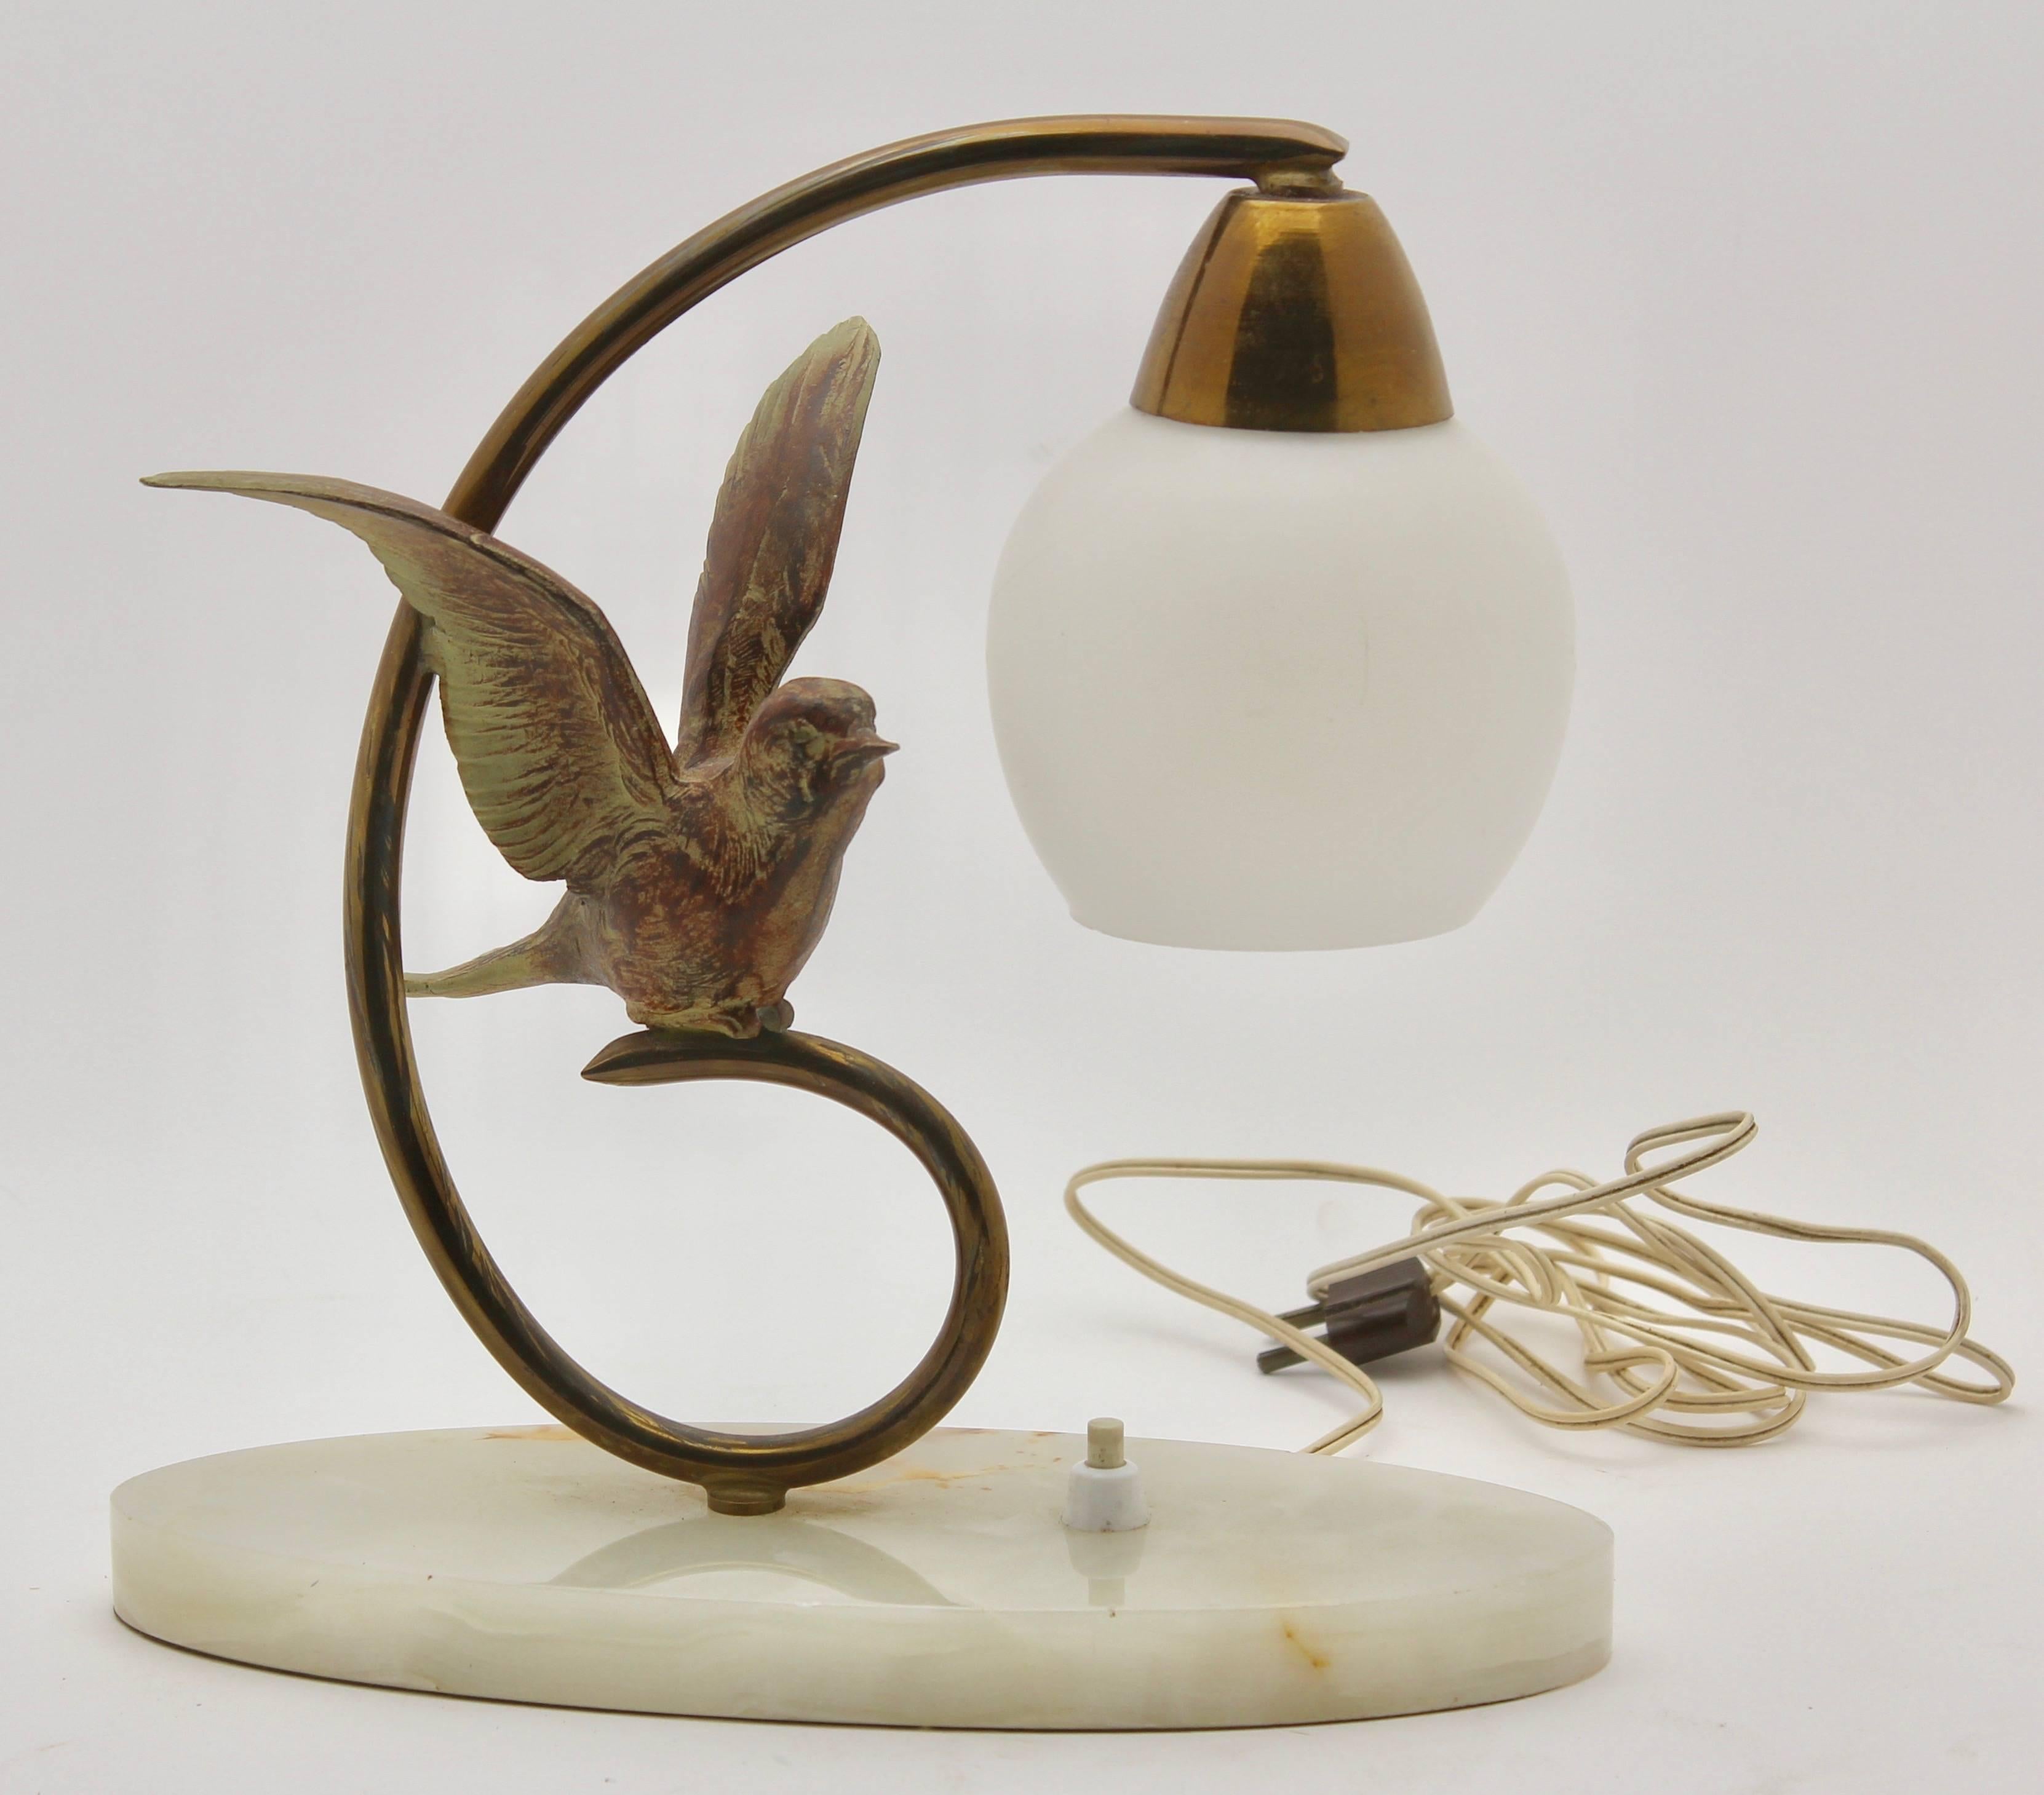 Mid-20th Century Art Deco Table Lamp with Bird Made of Bronze on Base of Alabaster, Label Prolux